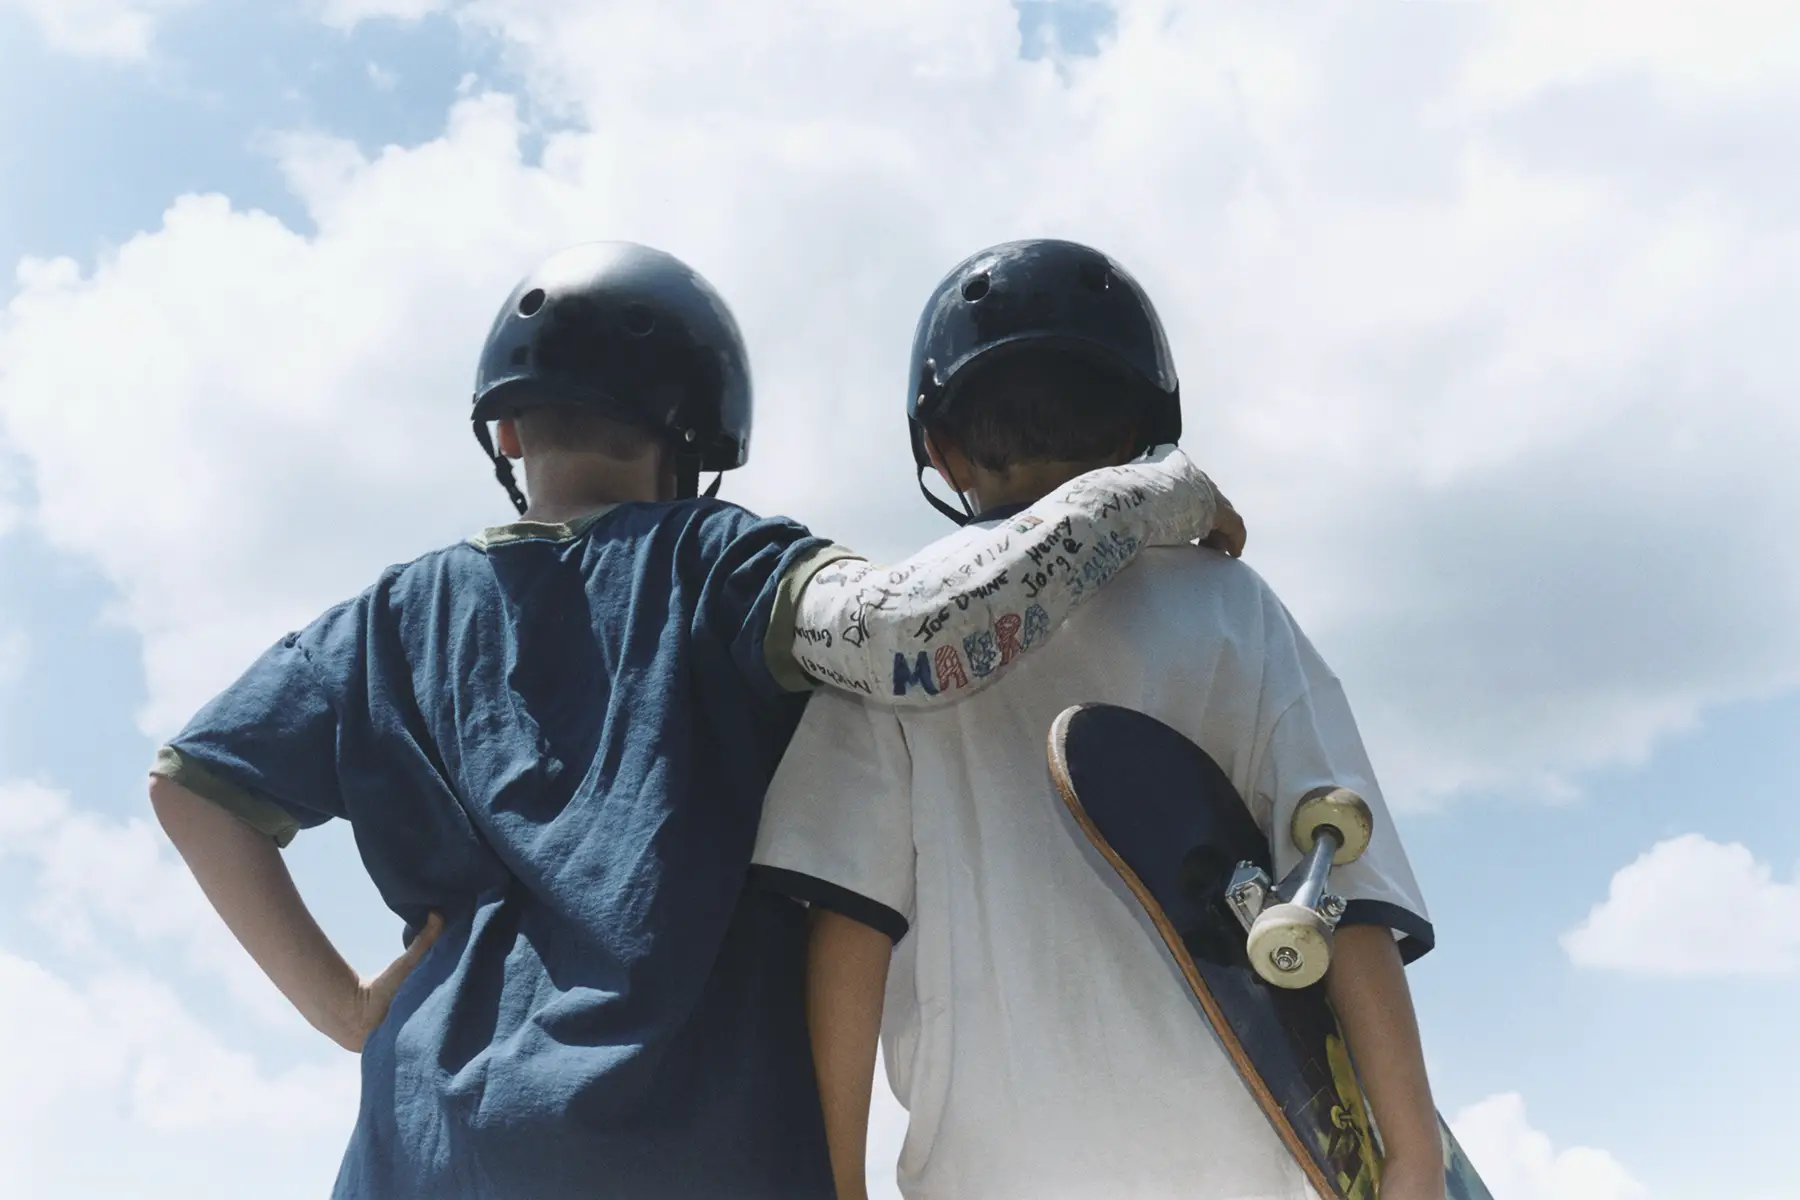 Two young skateboarders from behind with helmets, one hold a skateboard and other has his arm in a cast around the friend's shoulders